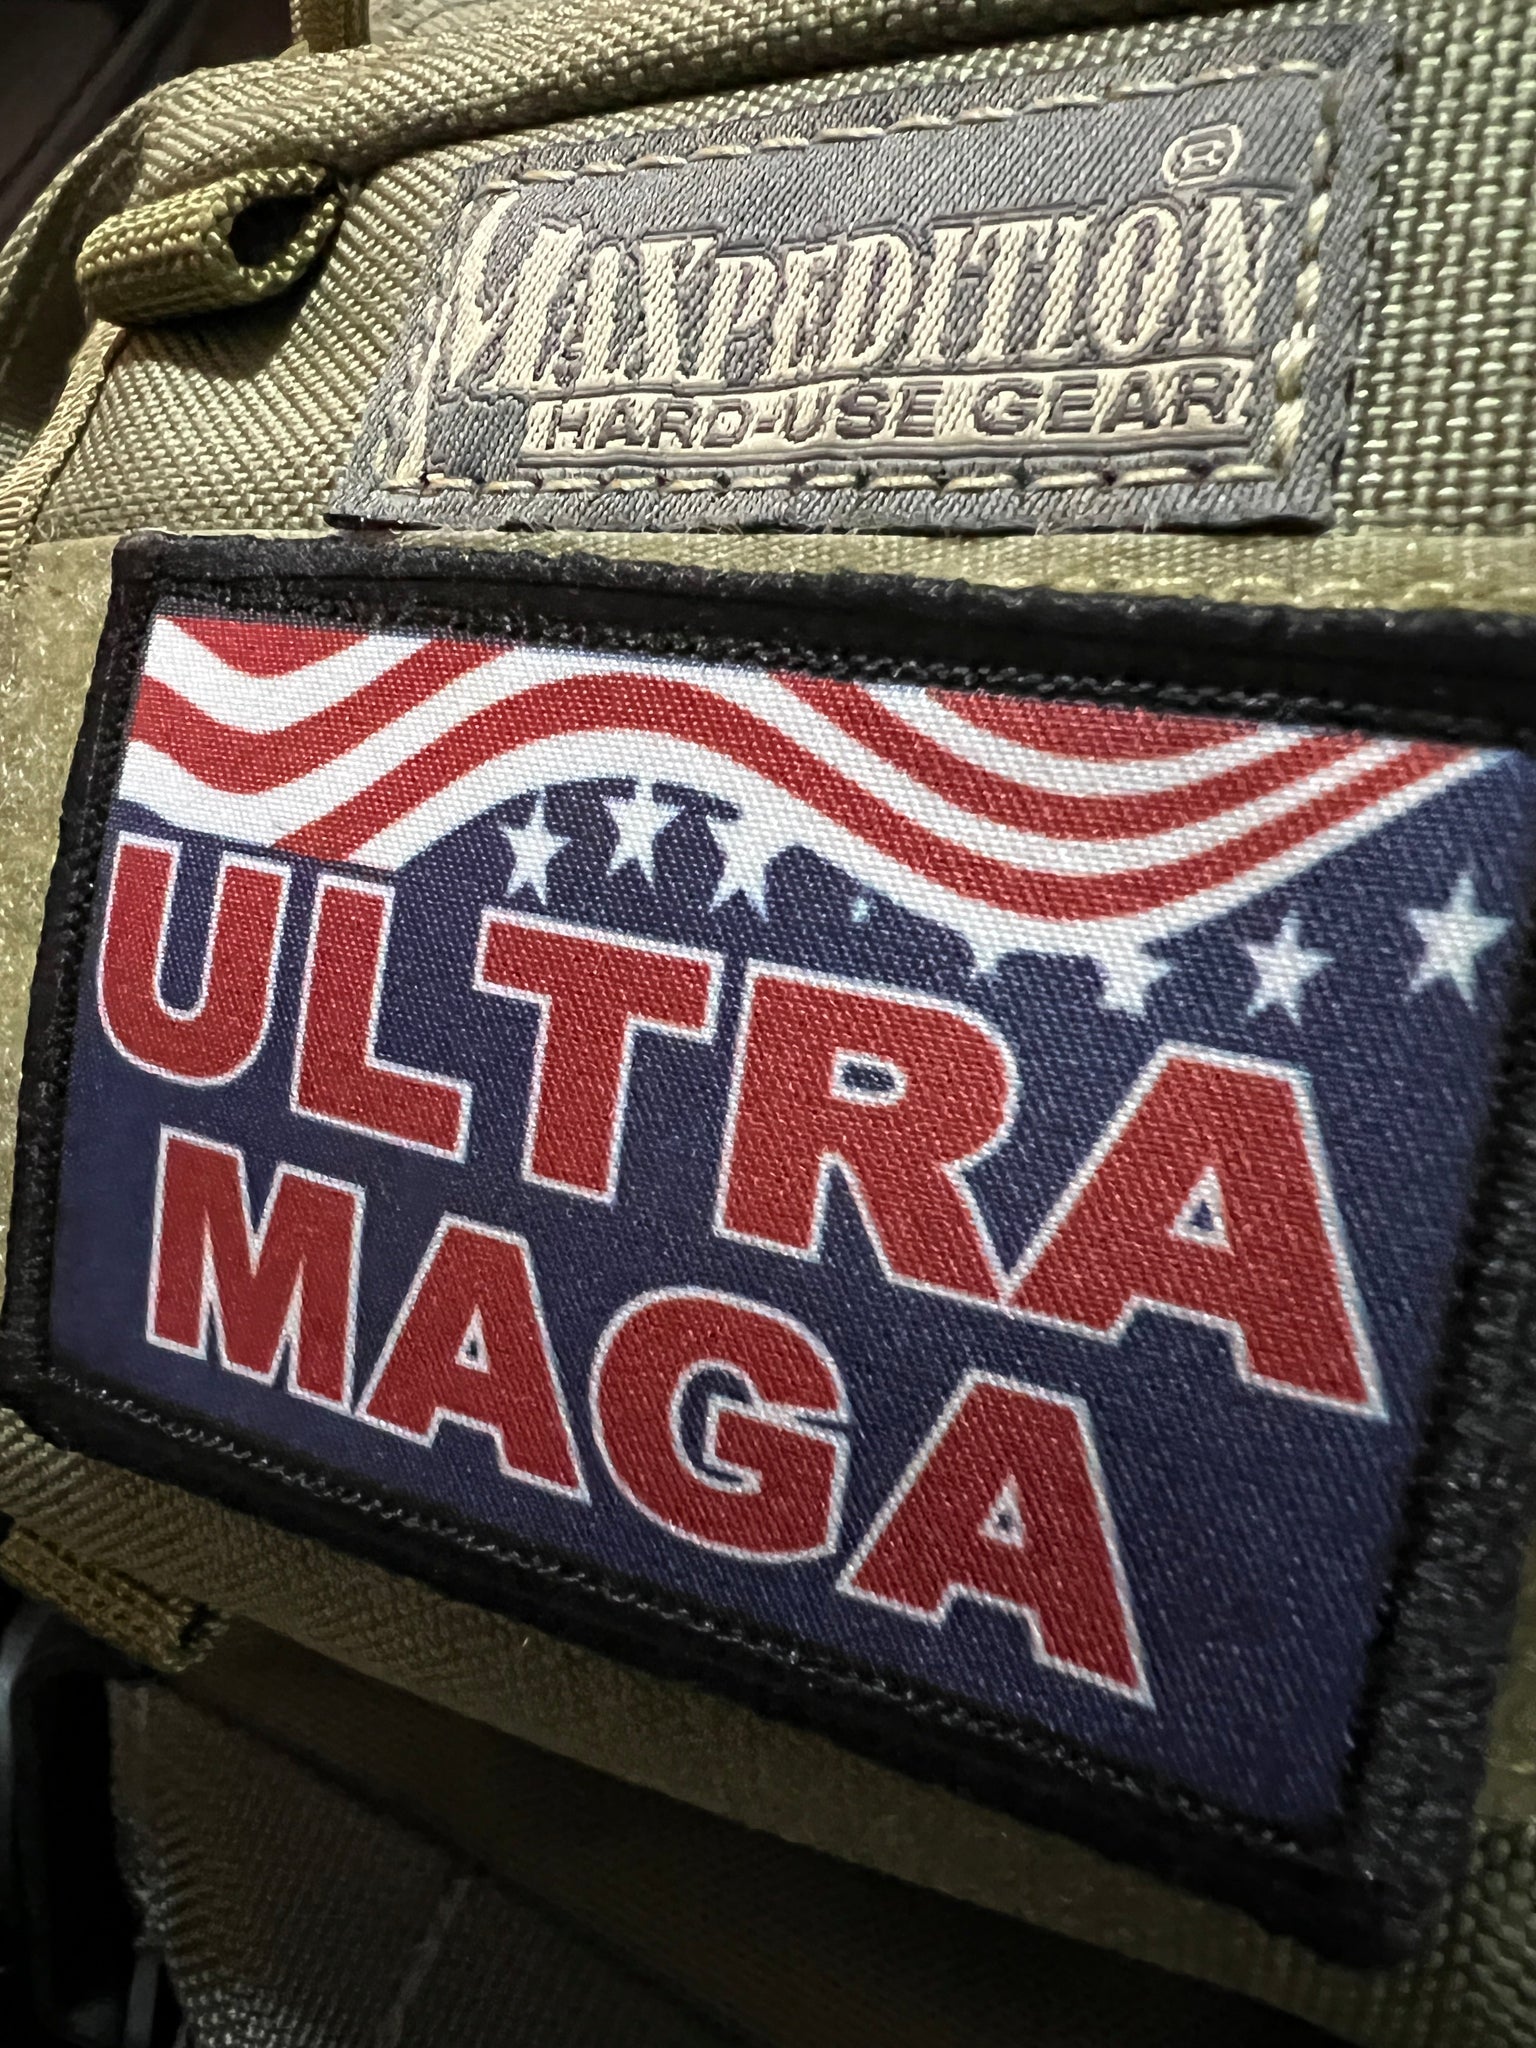 ULTRA MAGA Full Color Morale Patch Morale Patches Redheaded T Shirts 